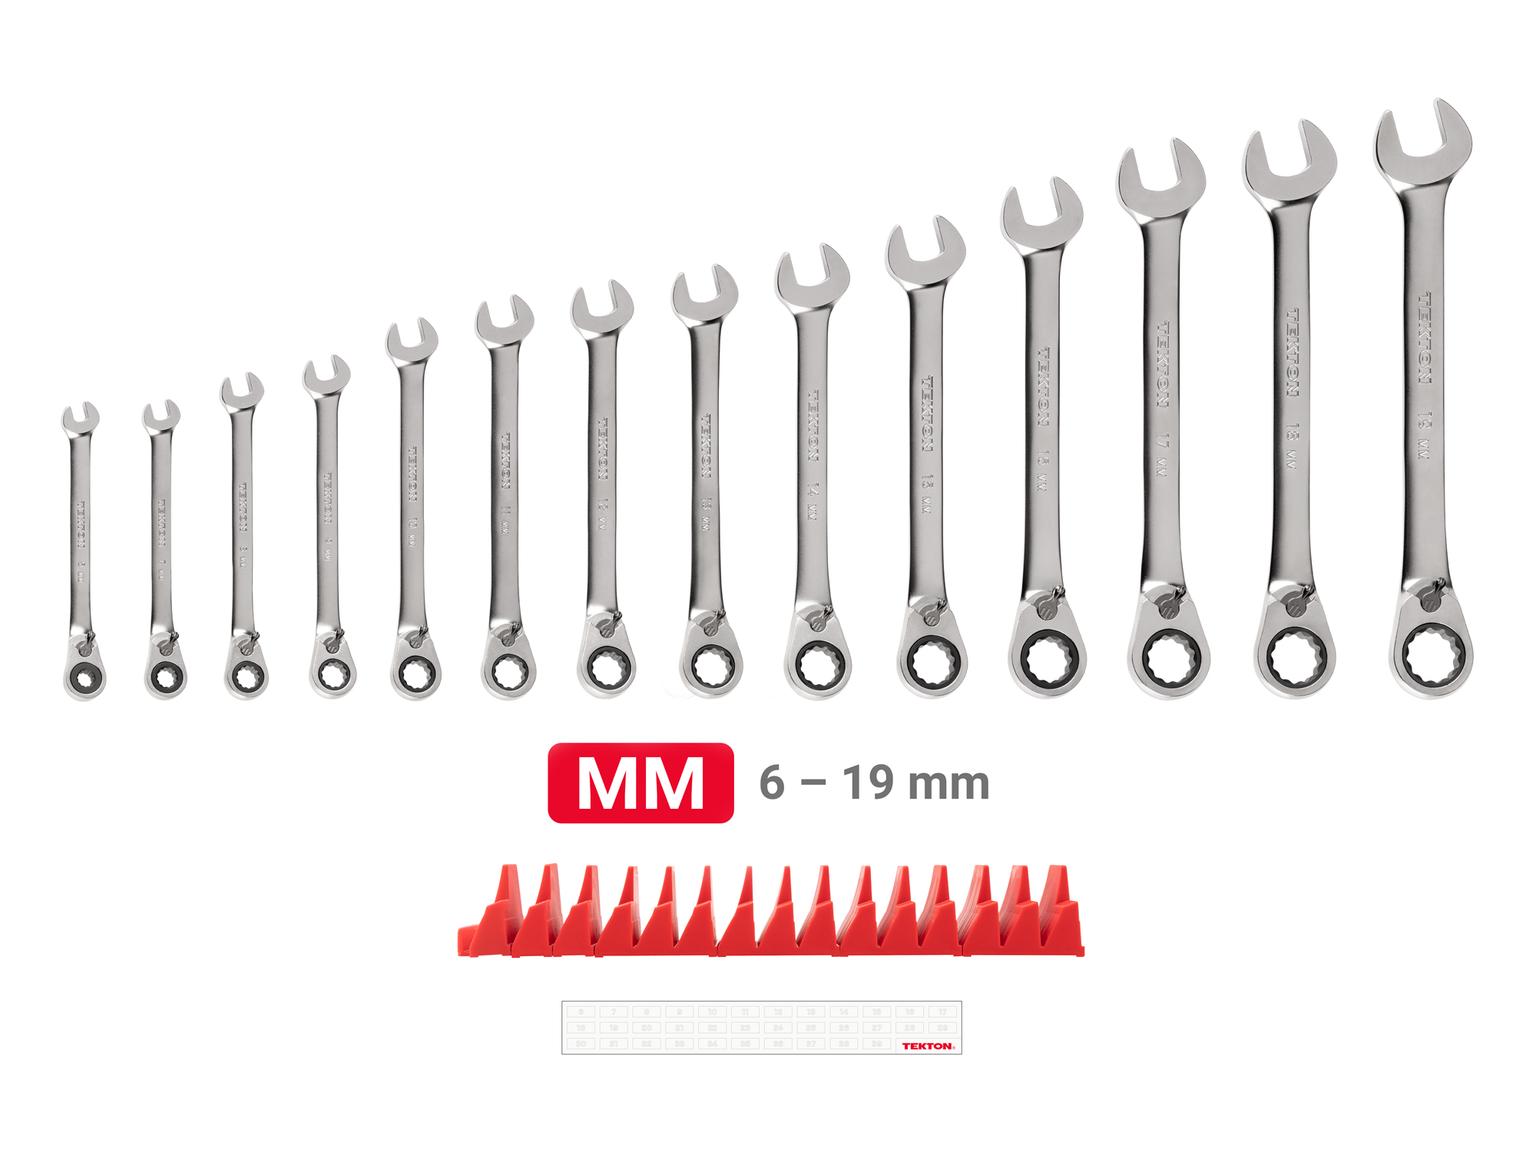 TEKTON WRC94302-T Reversible 12-Point Ratcheting Combination Wrench Set with Modular Slotted Organizer, 14-Piece (6-19 mm)